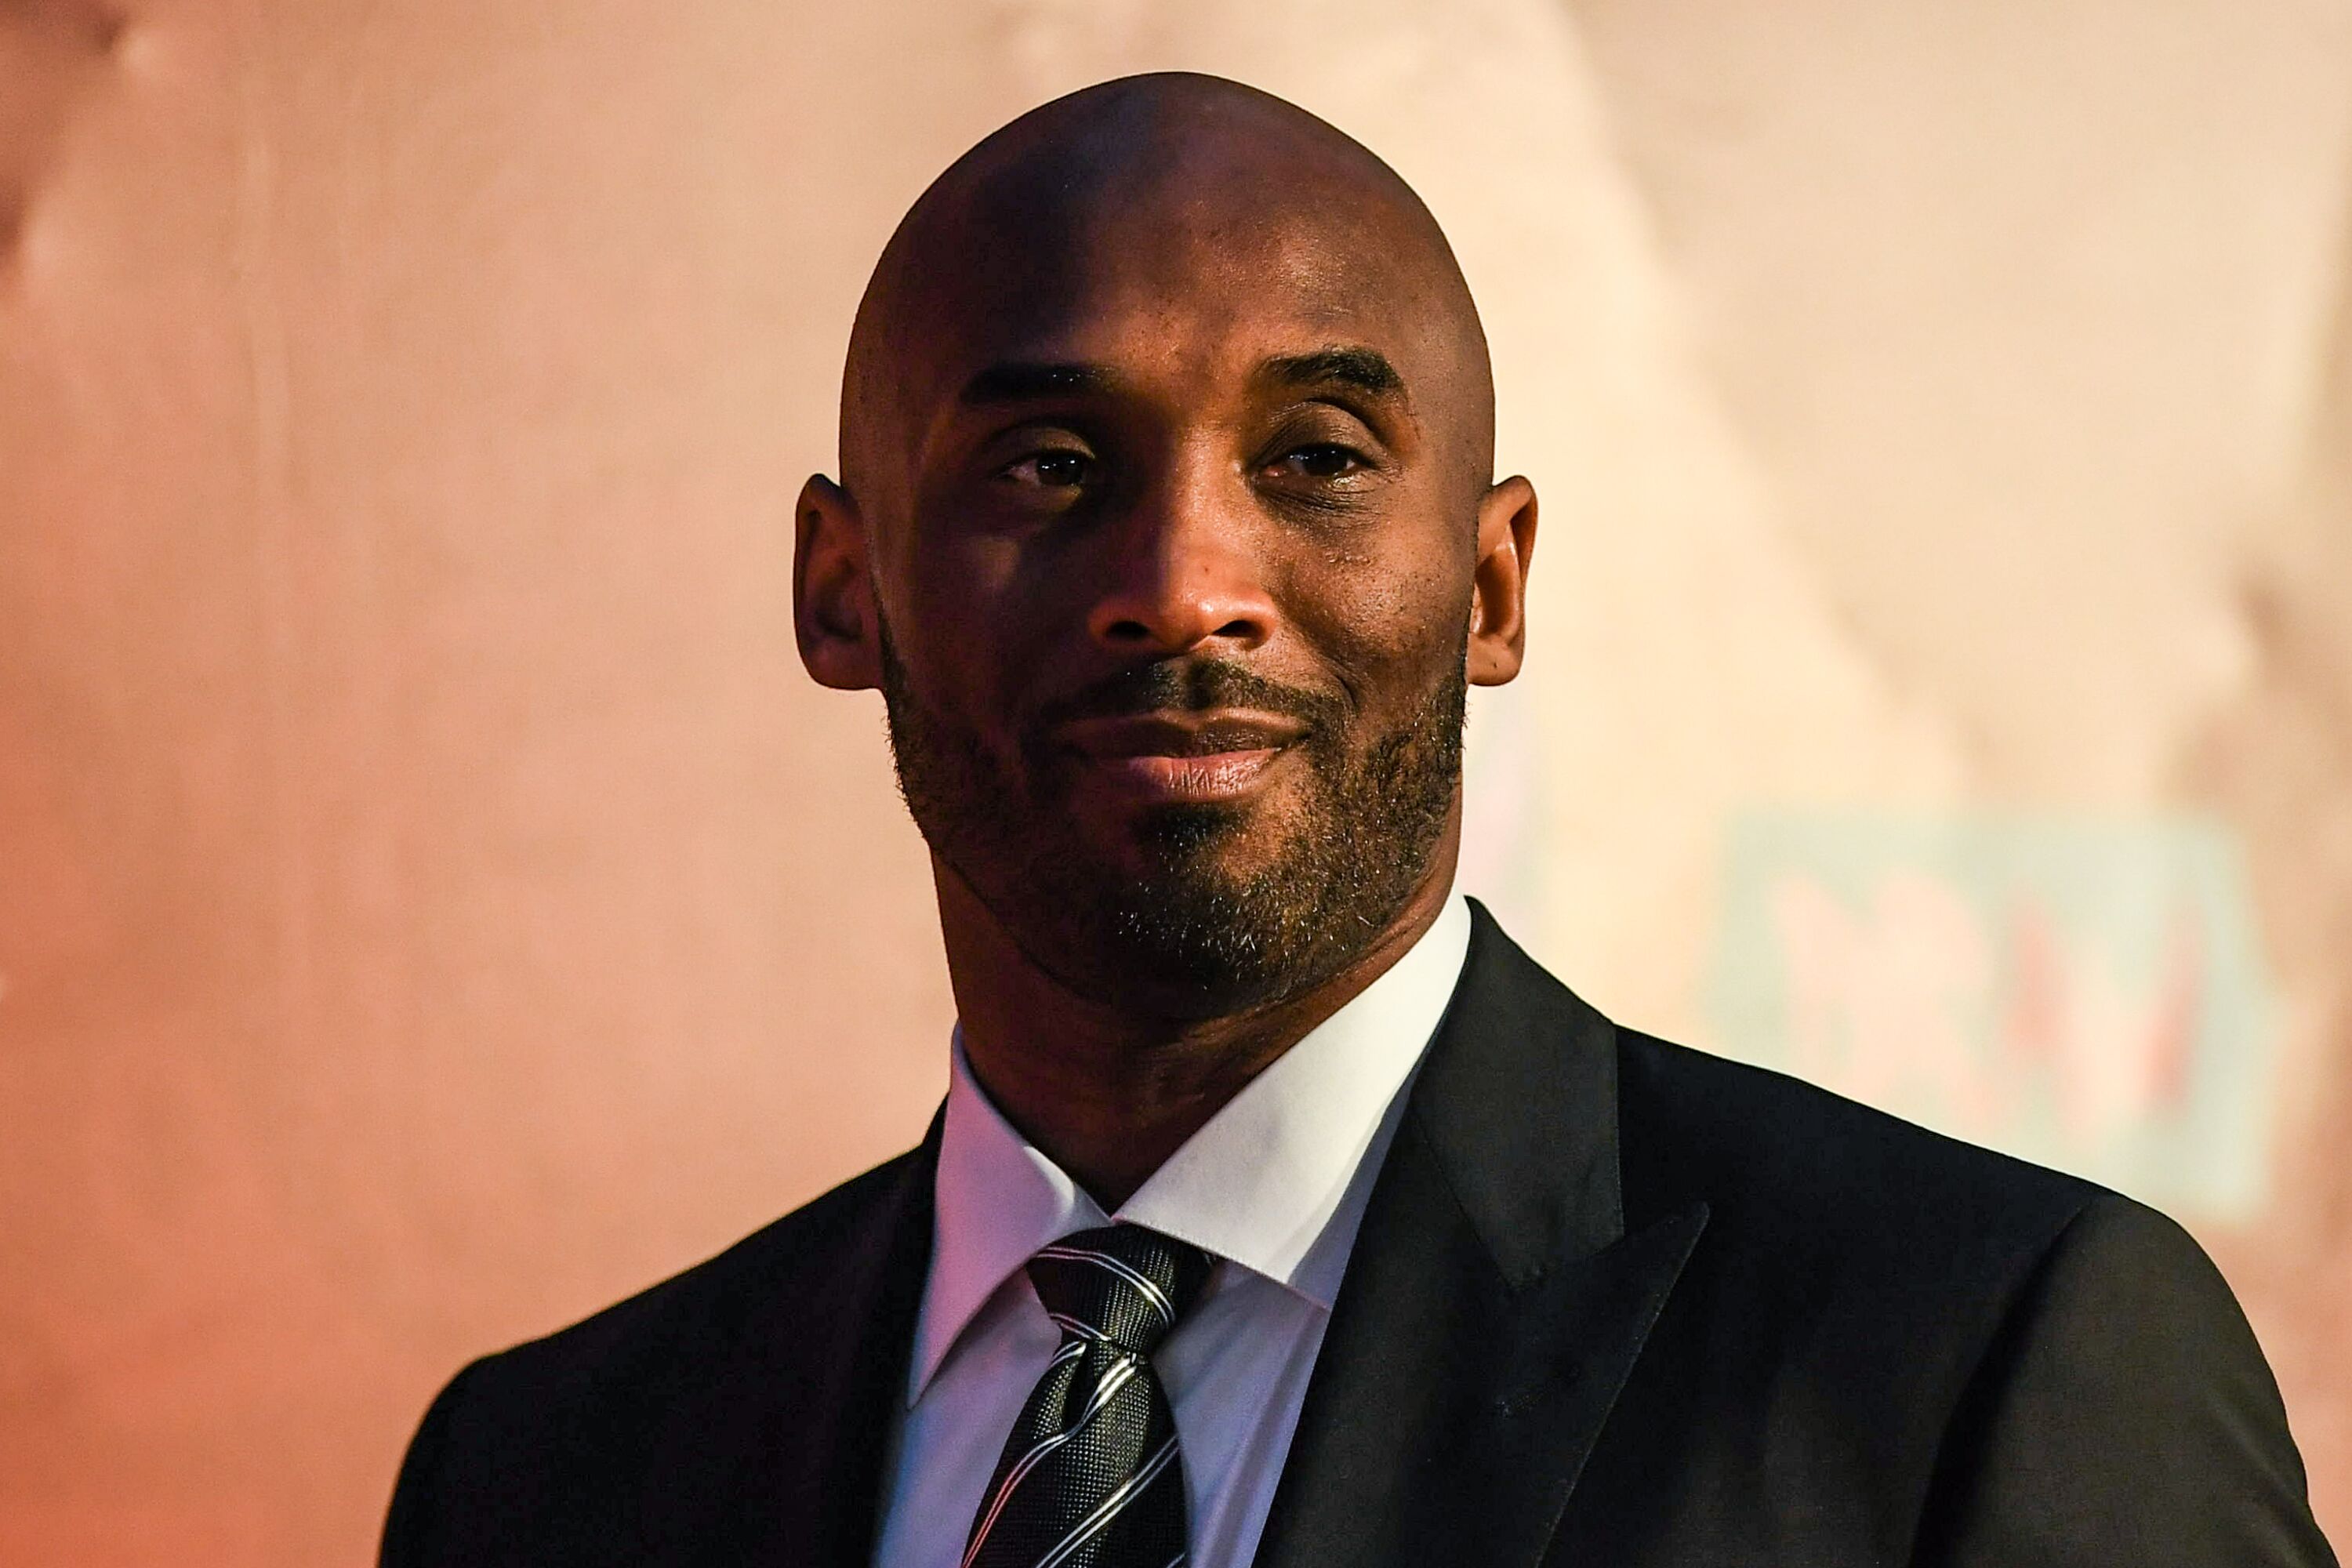 Kobe Bryant during the FIBA Basketball World Cup 2019 Draw Ceremony on March 16, 2019 in Shenzhen, China. | Getty Images